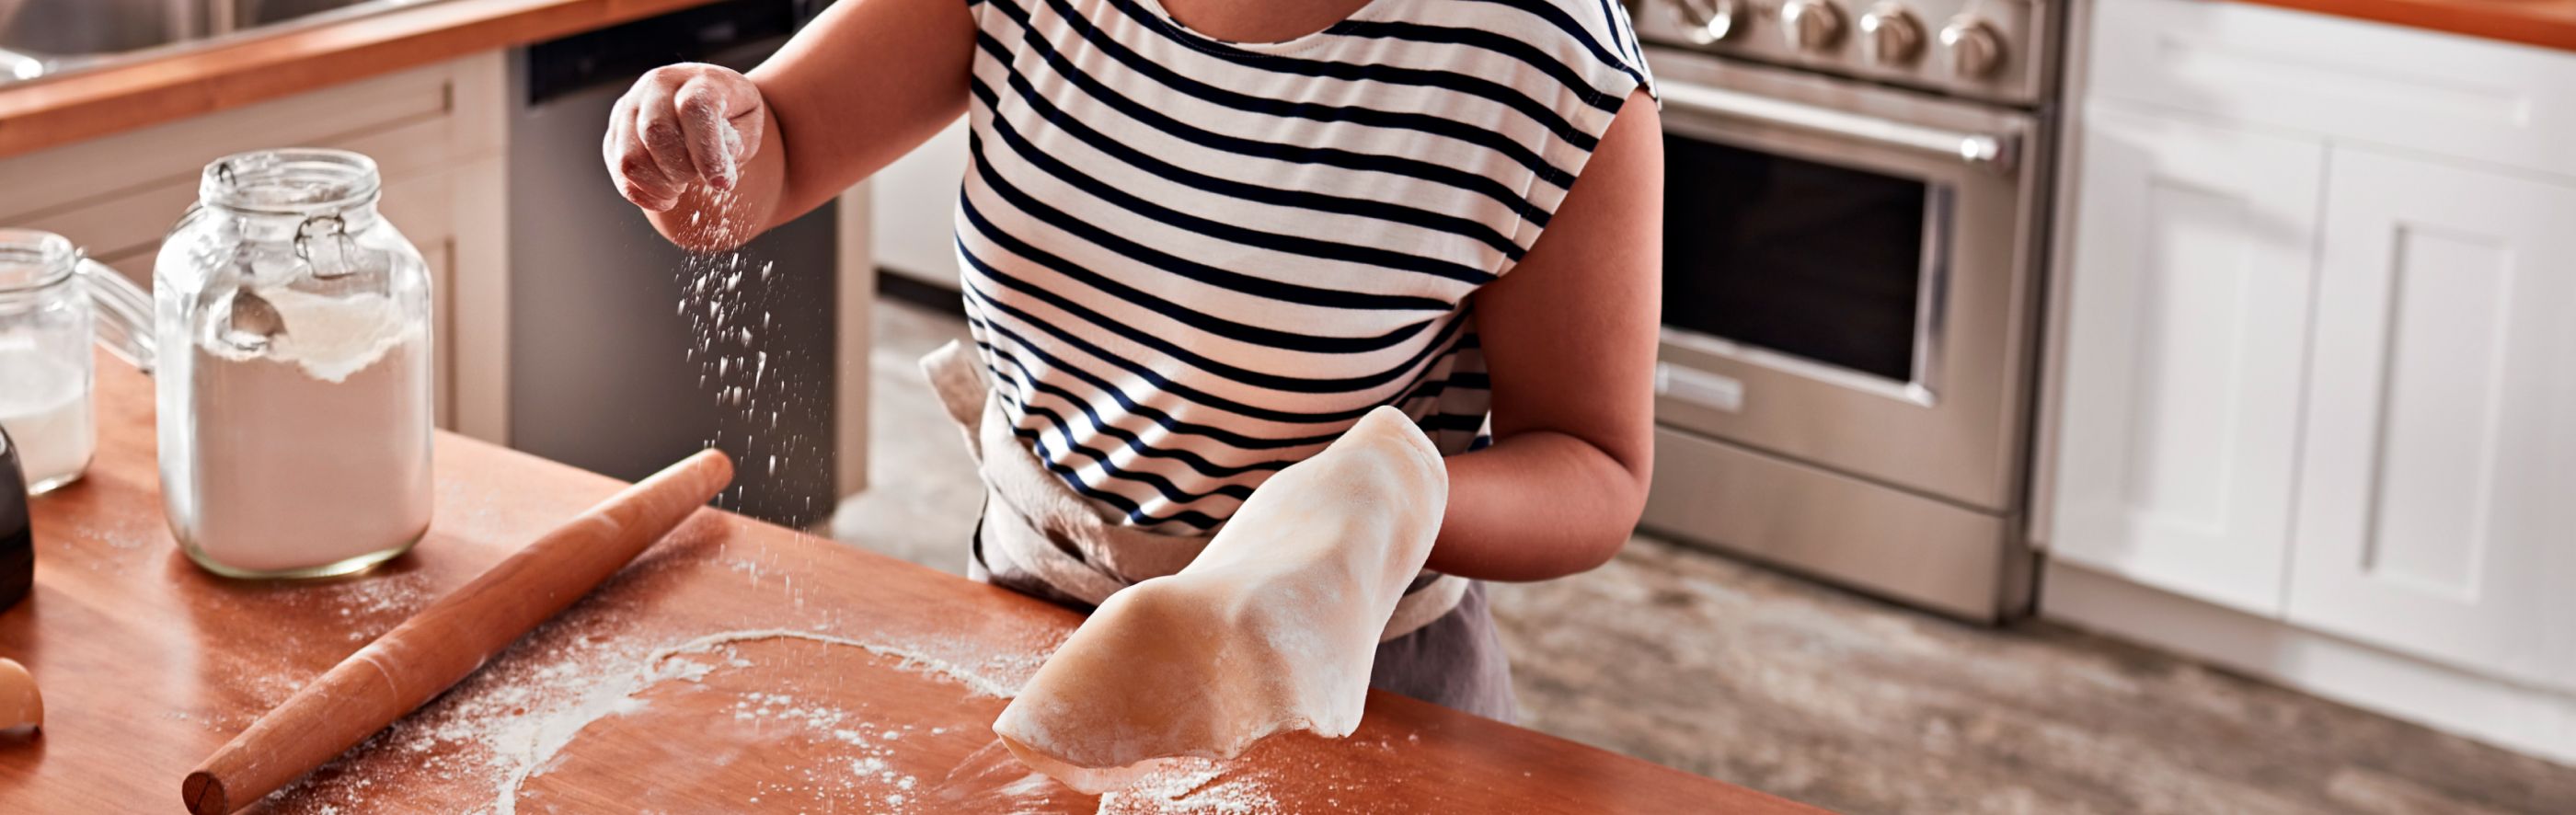 Woman rolling out dough on a countertop